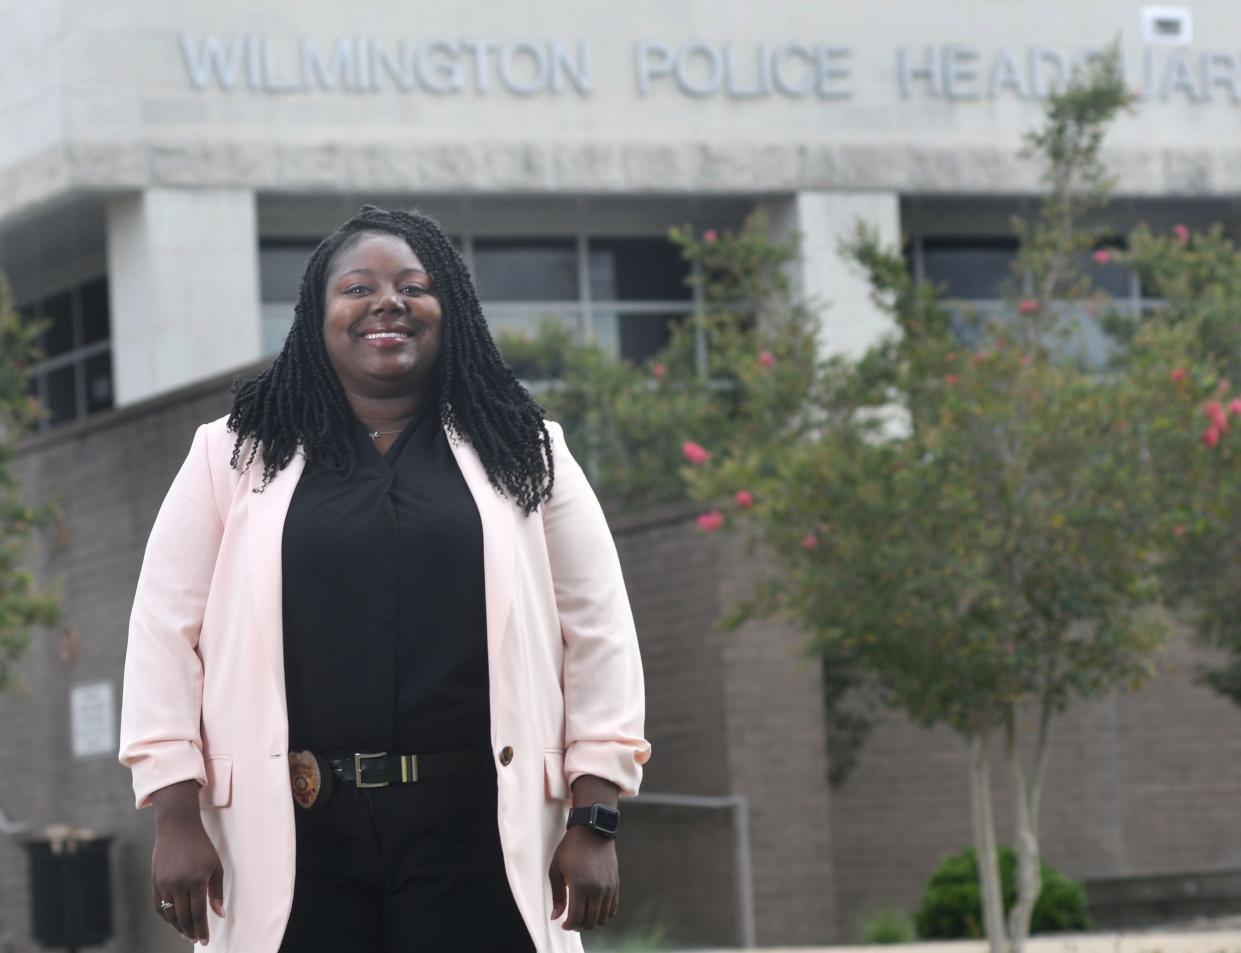 Aricka Sidbury, detective with the Wilmington Police Department, will not face charges in connection with an alleged crime, according to investigators.